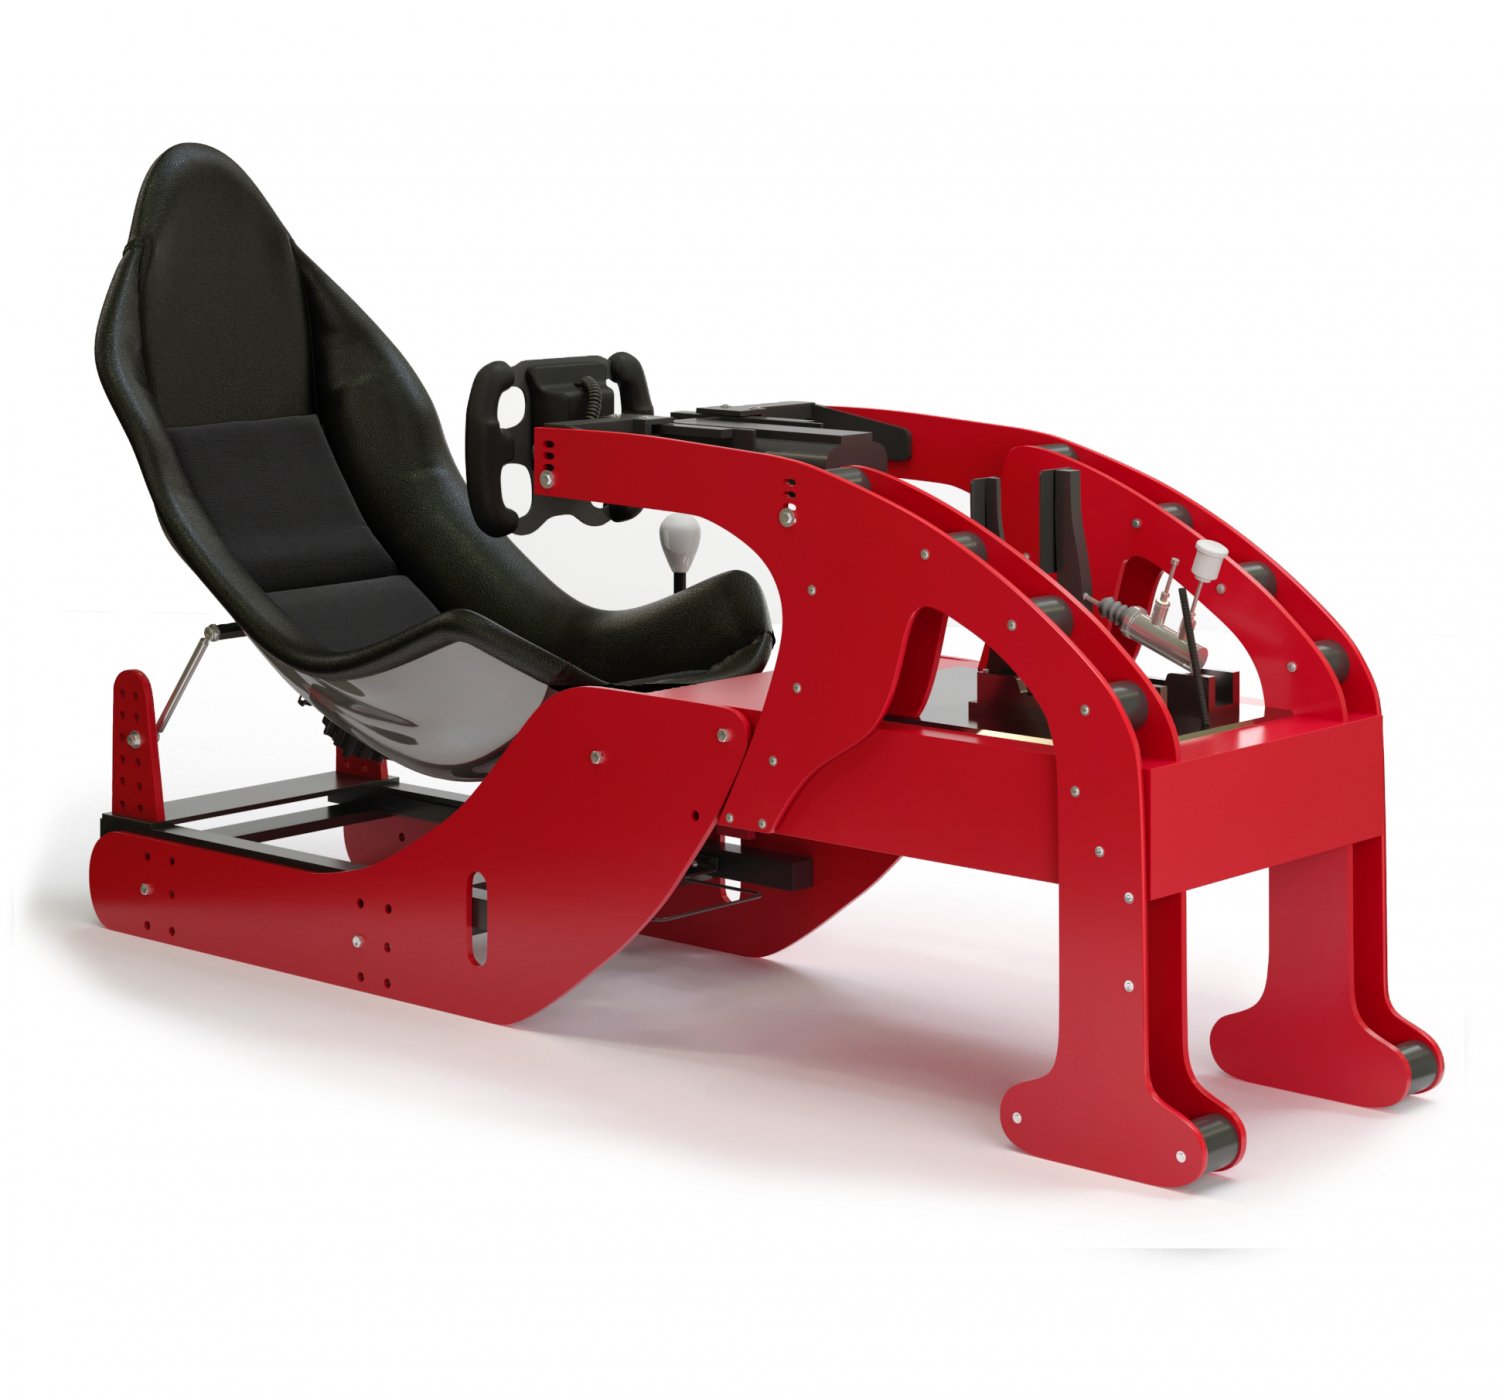 Racing Game Simulator Chair Evolution F1 3d Model In Computer